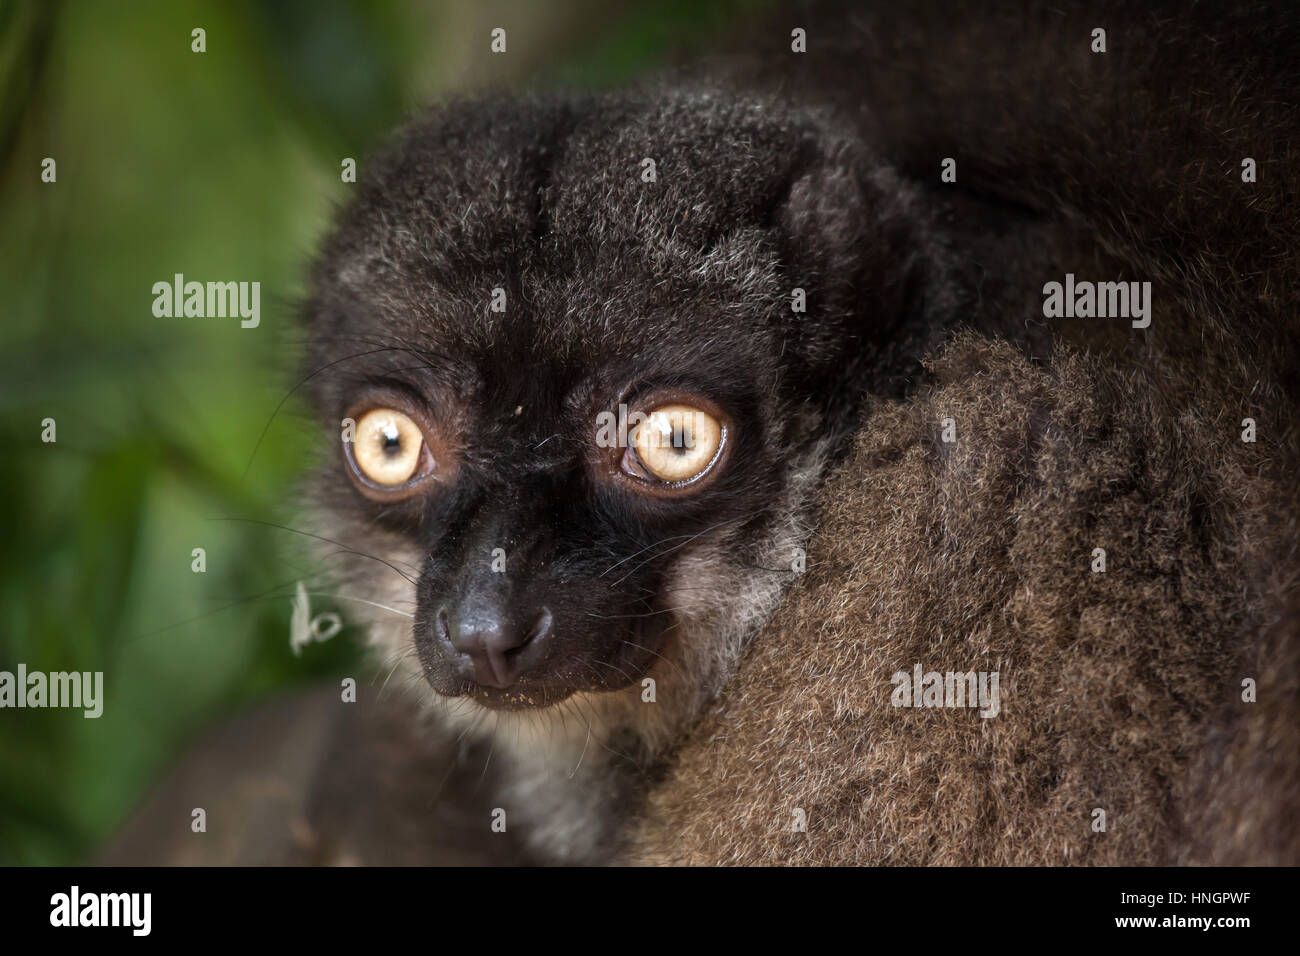 Female white-headed lemur (Eulemur albifrons), also known as the white-fronted brown lemur. Stock Photo